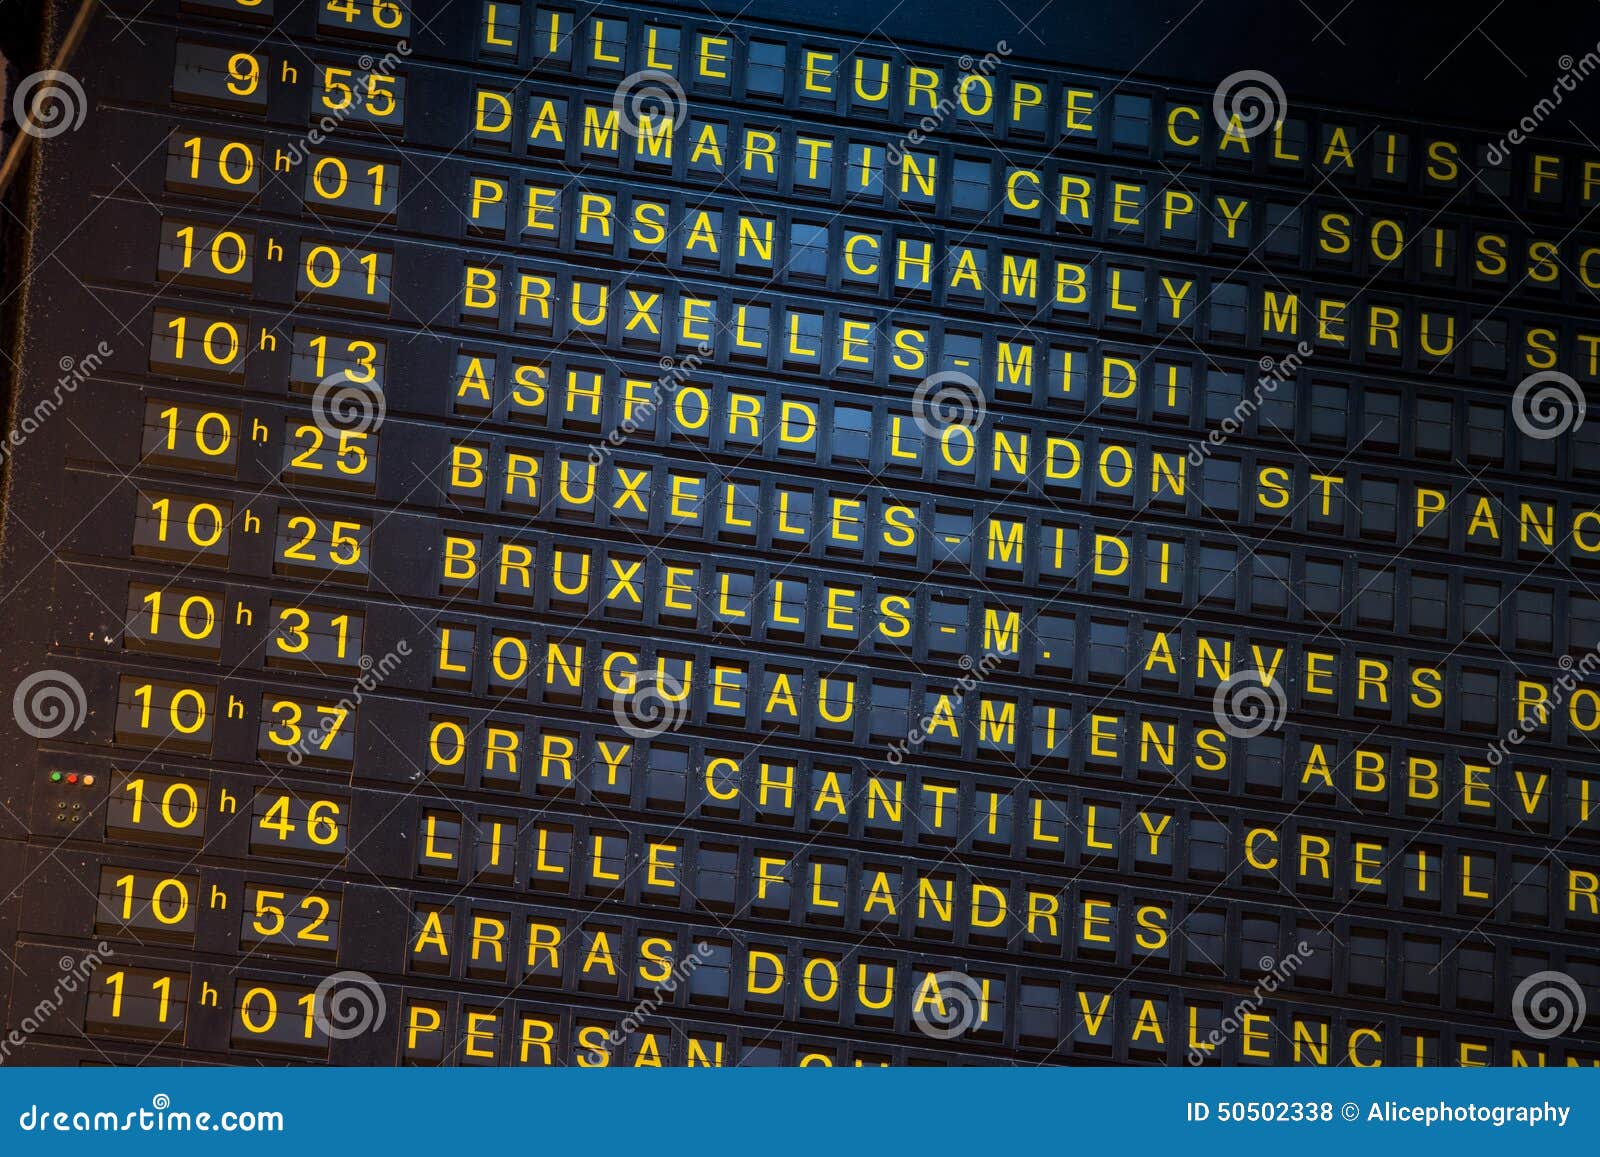 Departure Board On The Train Station In Paris France Stock Photo